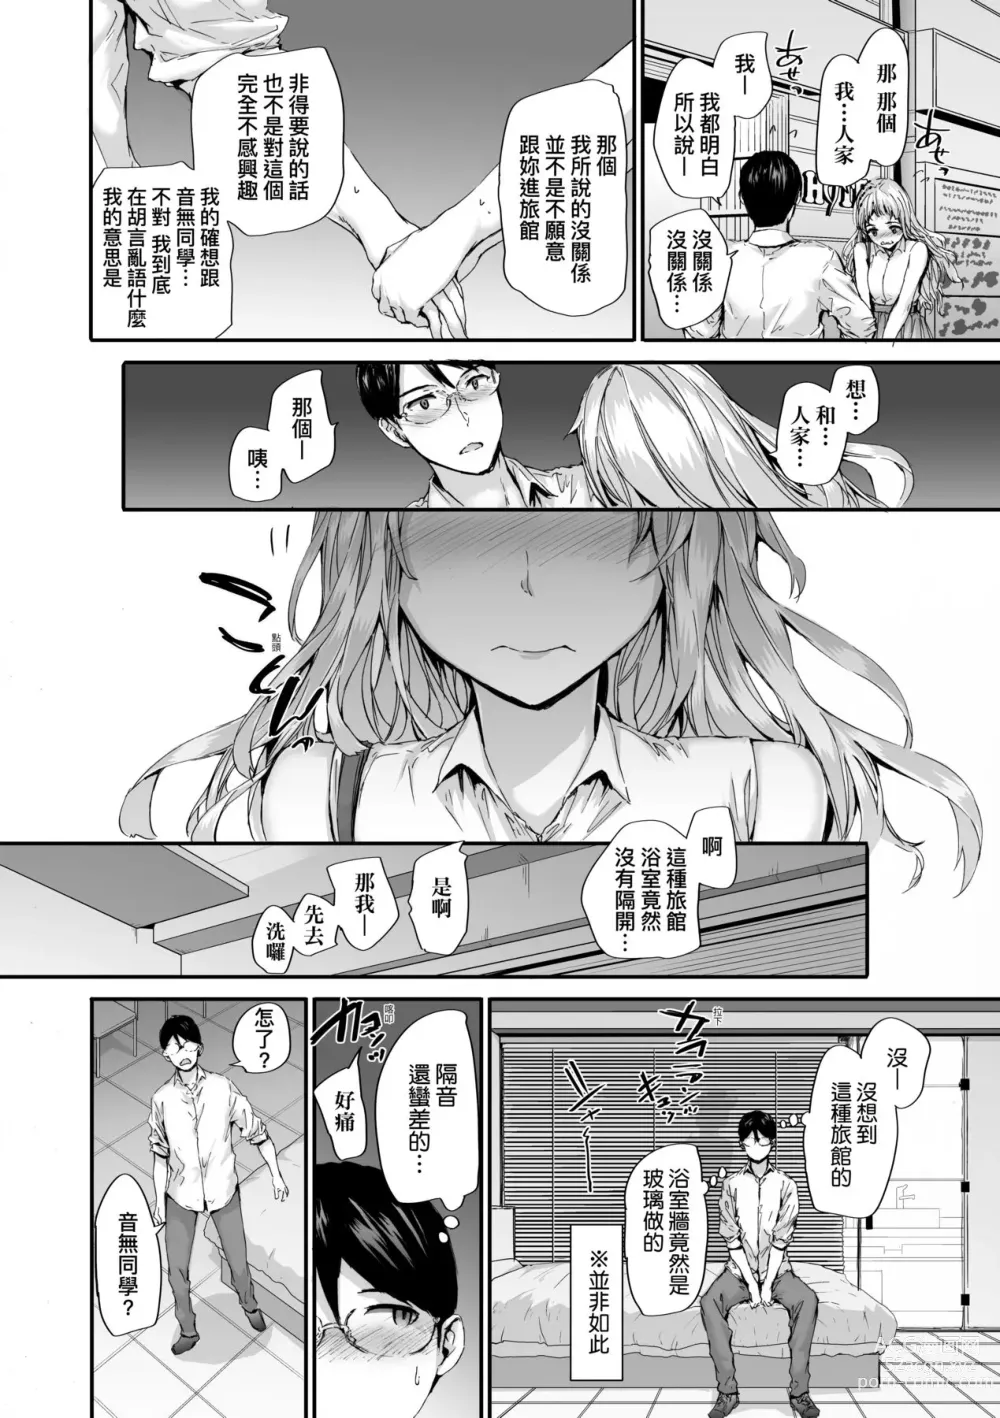 Page 11 of doujinshi Say you love me with your mouth